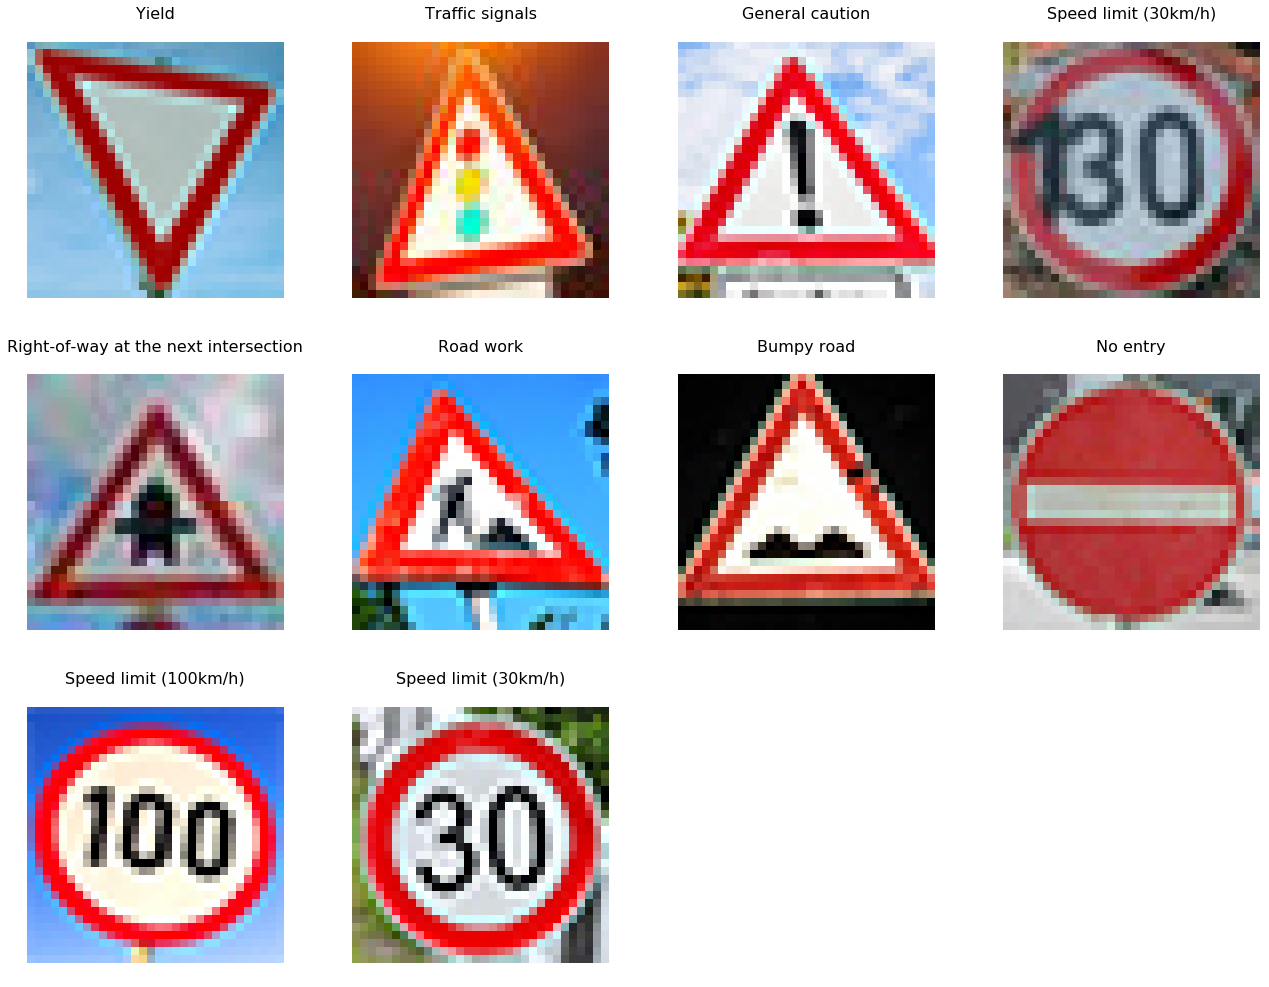 Neural Network Architecture for Detecting Traffic Signs